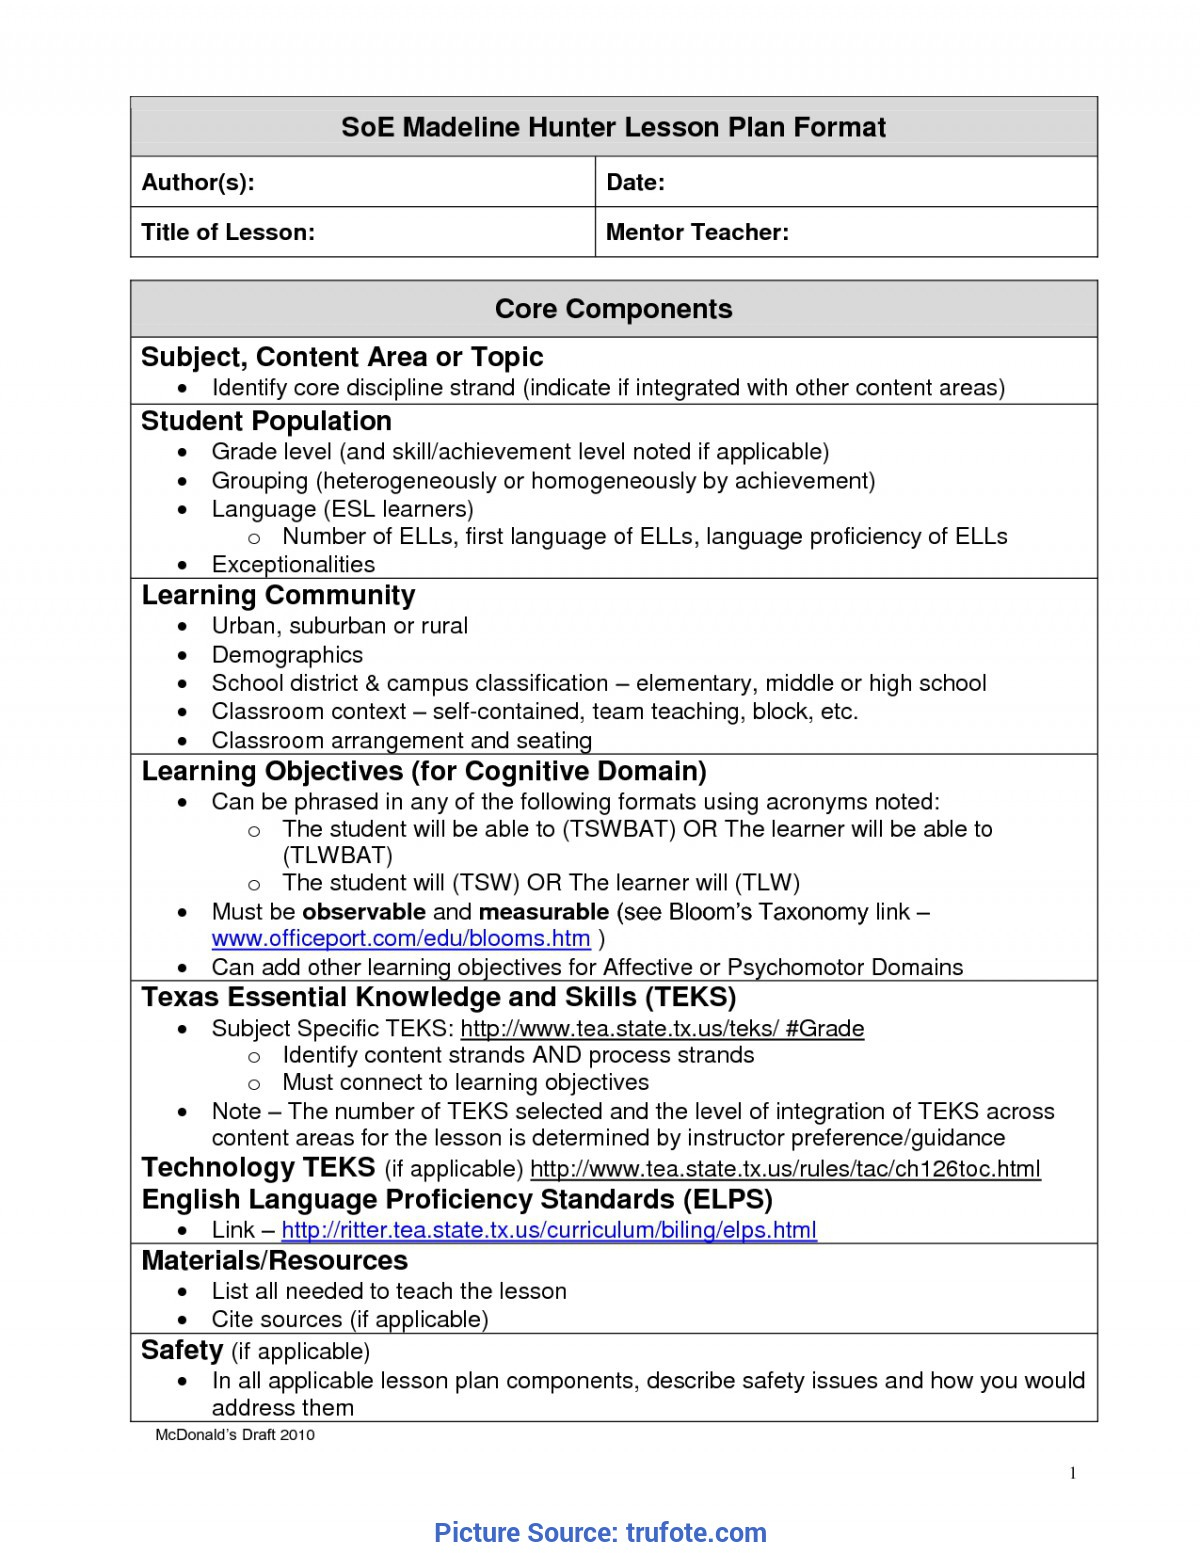 Excellent Madeline Hunter Lesson Plan Template Madeline With Regard To Madeline Hunter Lesson Plan Template Blank